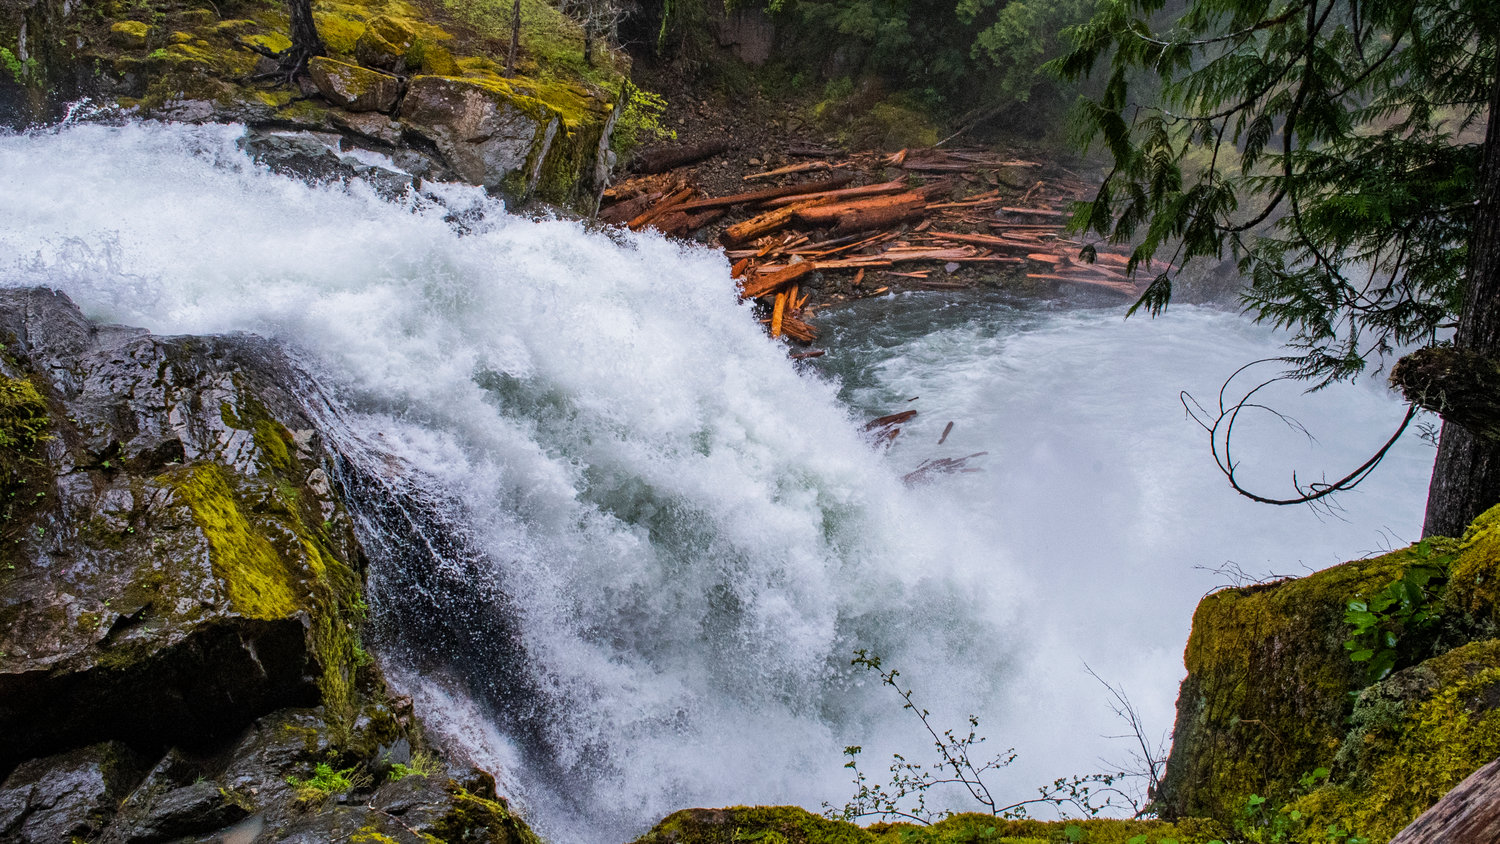 The Ohanapecosh River cascades down the Silver Falls in Mount Rainier National Park on Sunday afternoon, logs thrown and broken by the wild glacial river can be seen in the background.